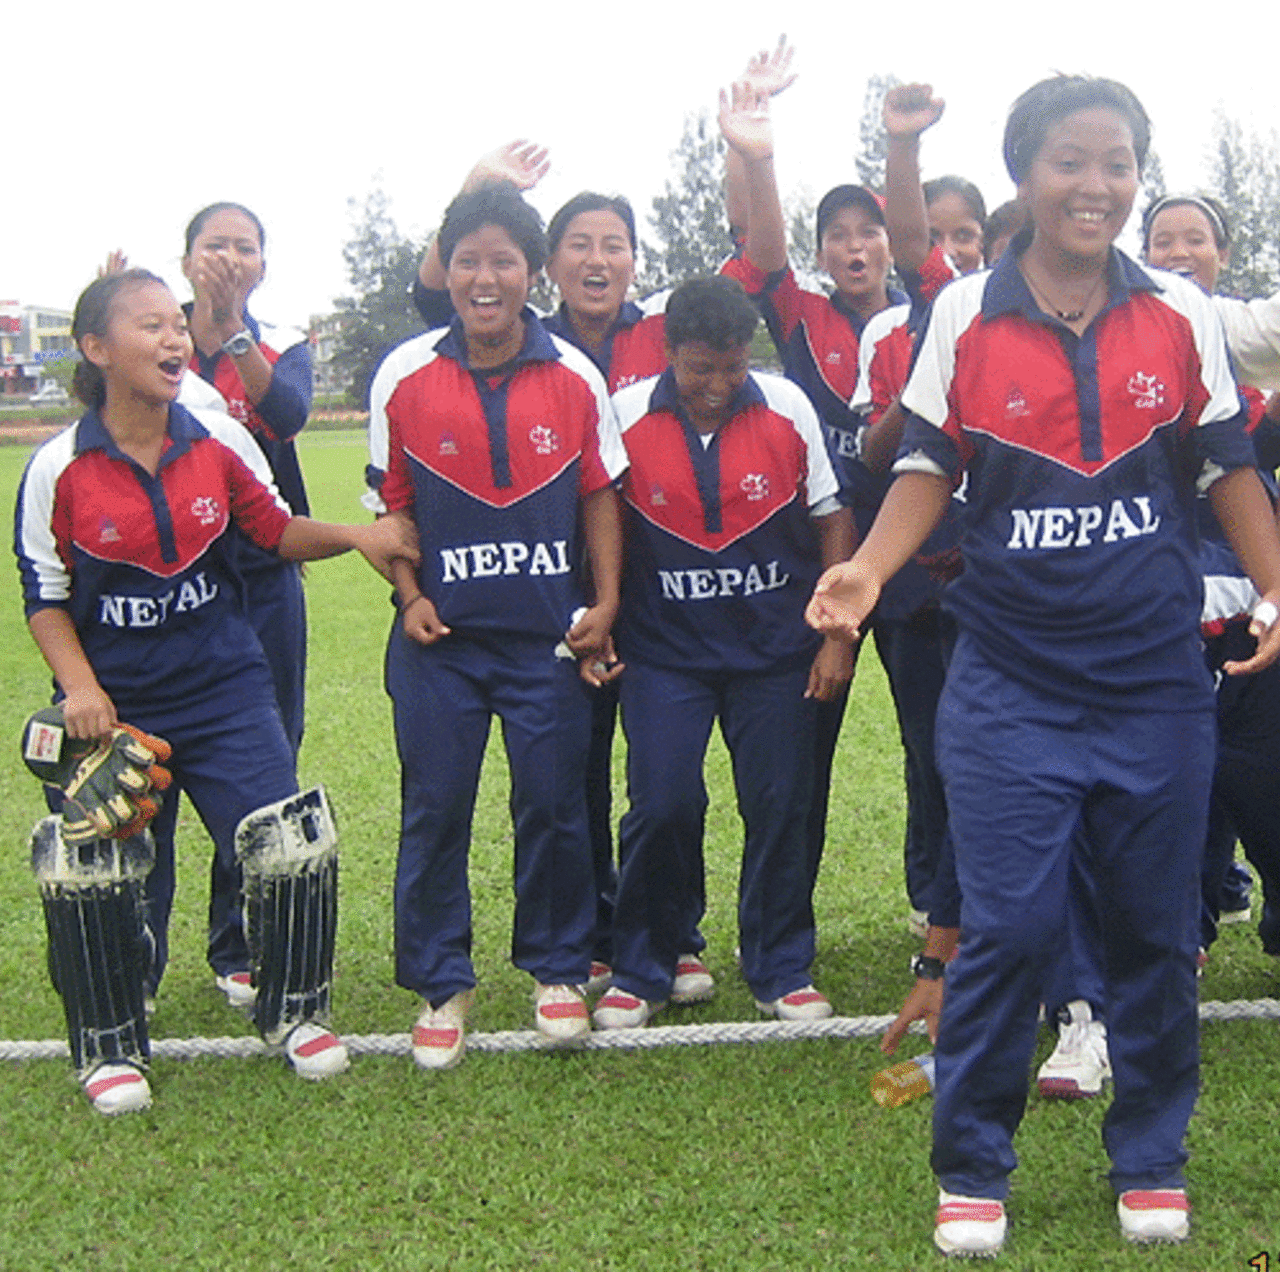 The Nepal players celebrate after qualifying for the semi-finals, Hong Kong women v Nepal women, ACC women's tournament, Johor, July 15, 2007